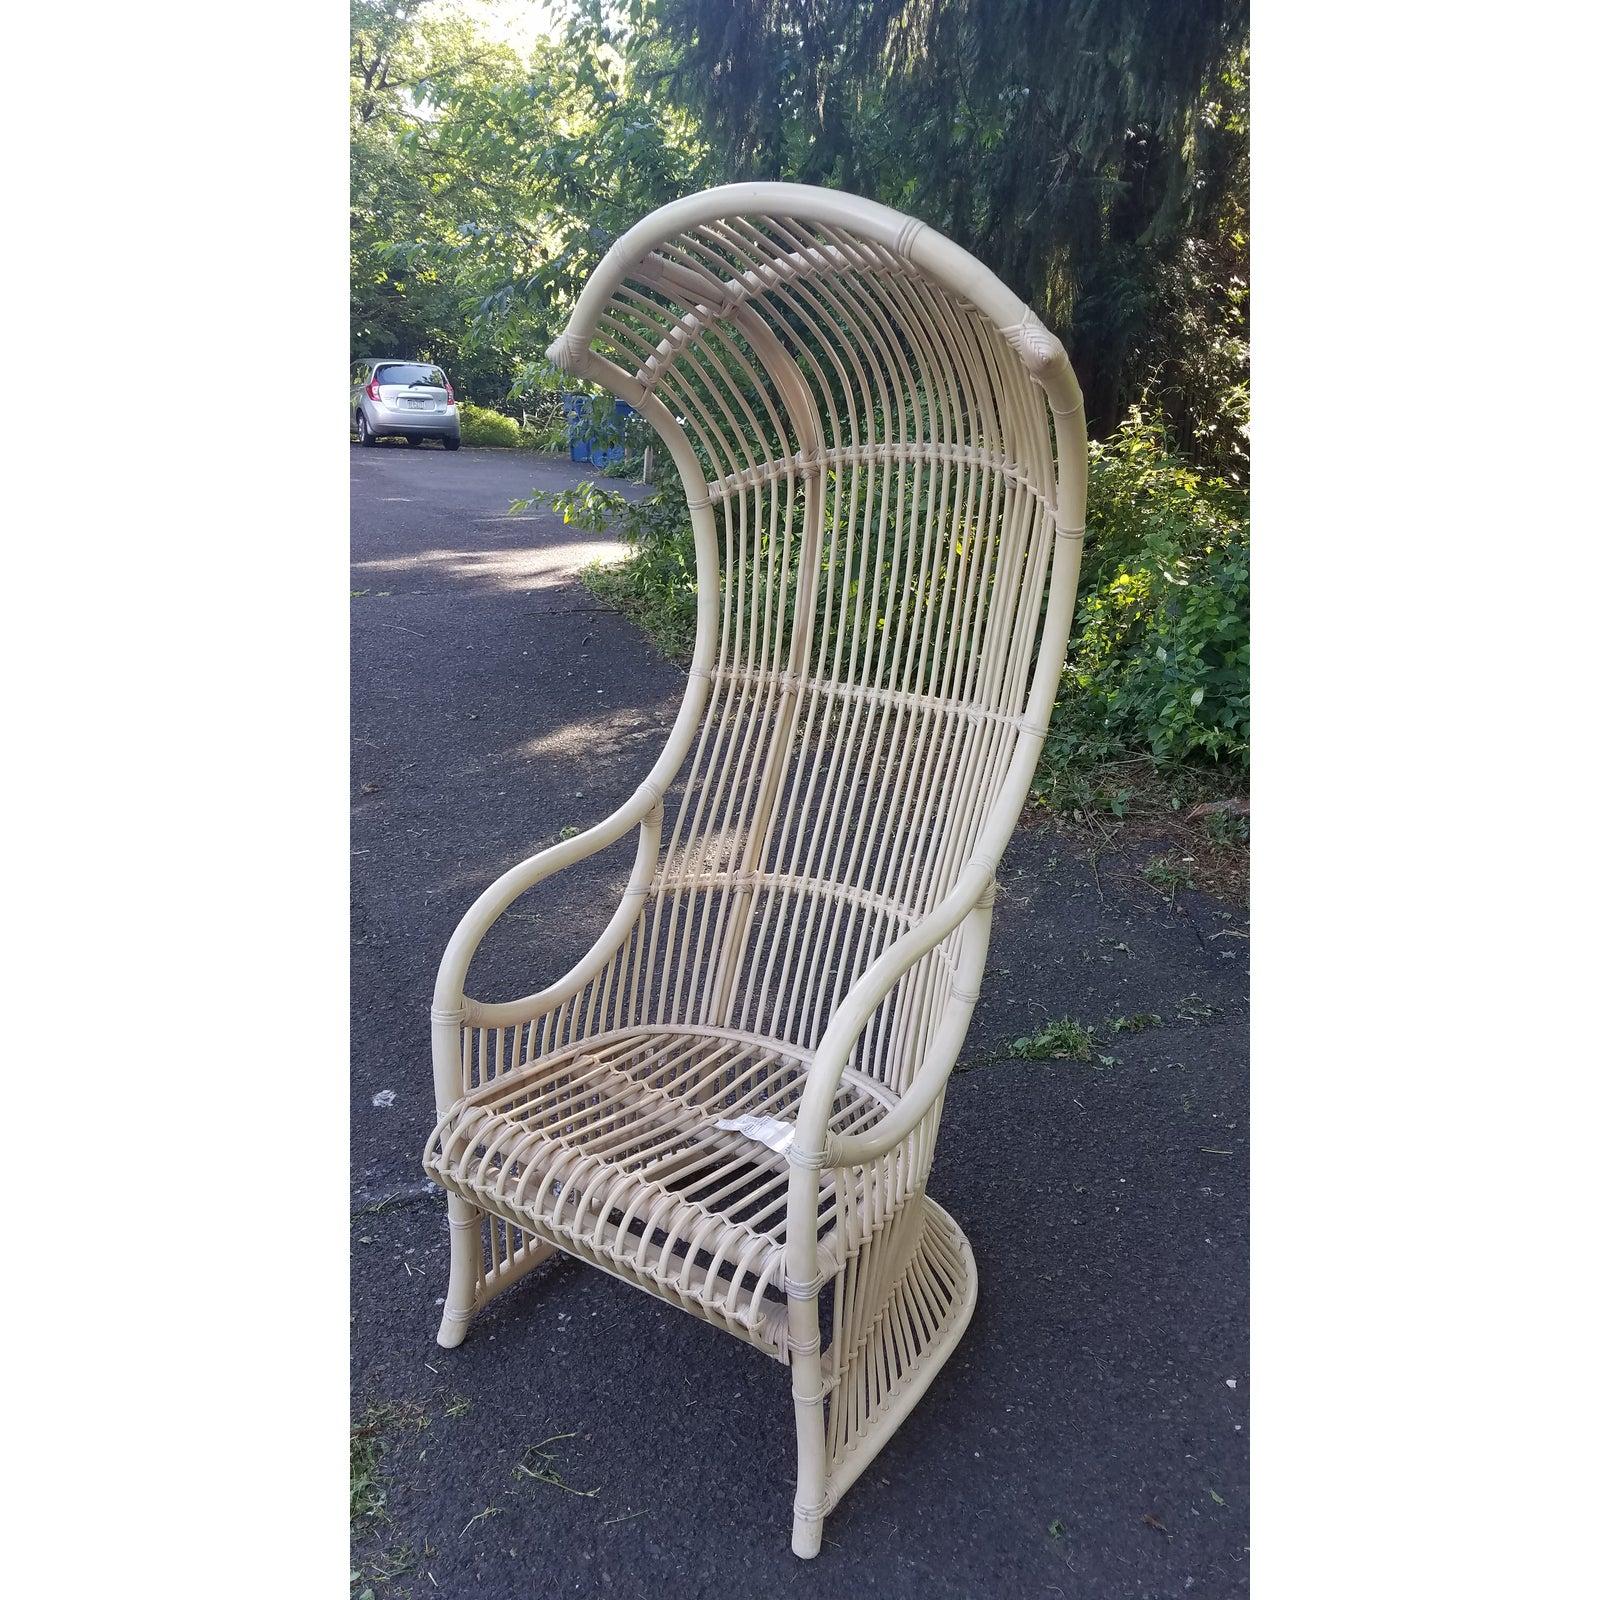 Wonderful bamboo rattan canopy chair designed by Henry Olko for Willow and Reed, NY.
Pale painted finish, in excellent condition.
